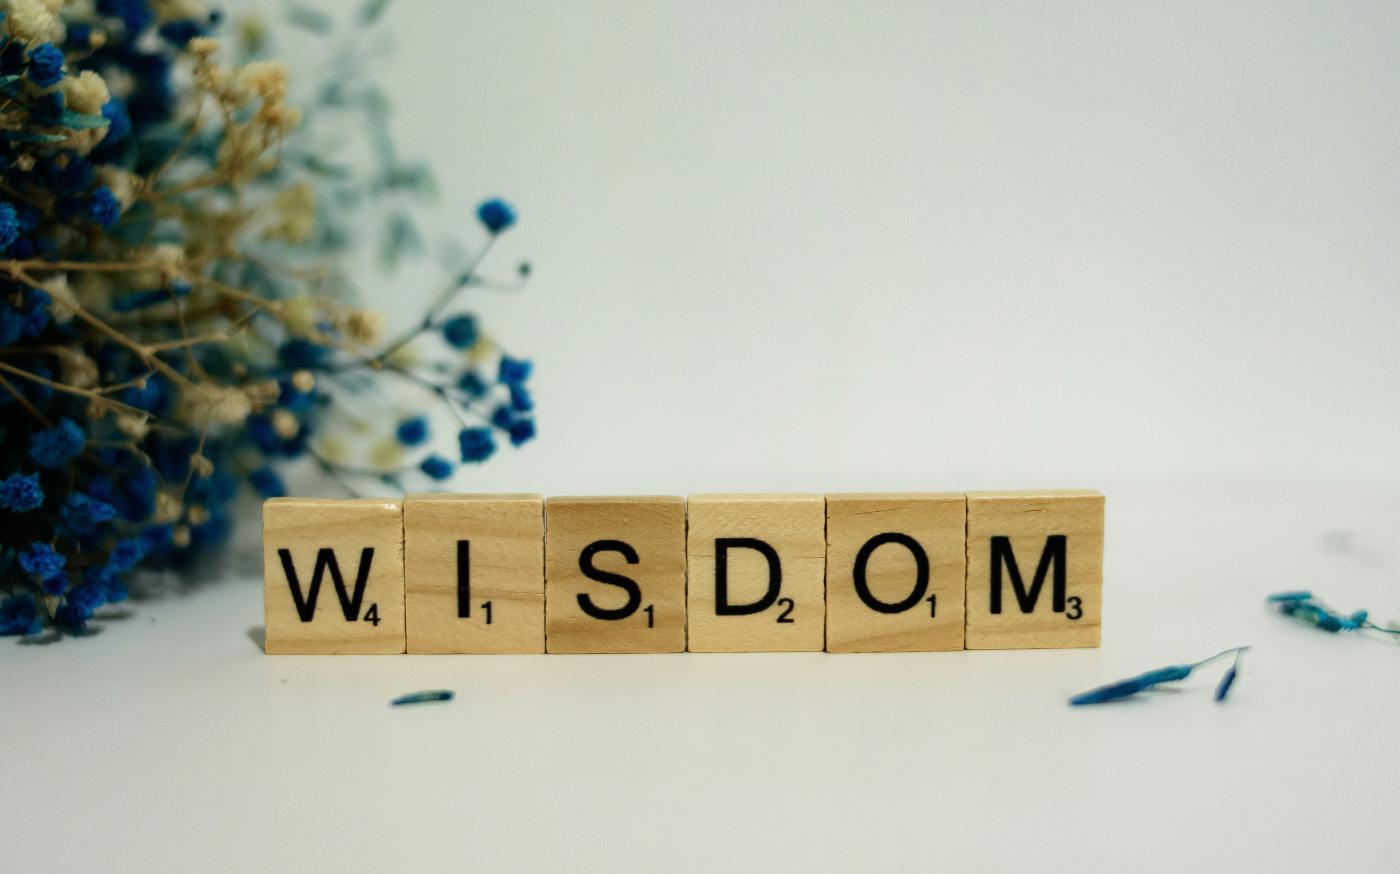 a wooden block spelling the word wisdom next to a bouquet of flowers by Alex Shute courtesy of Unsplash.